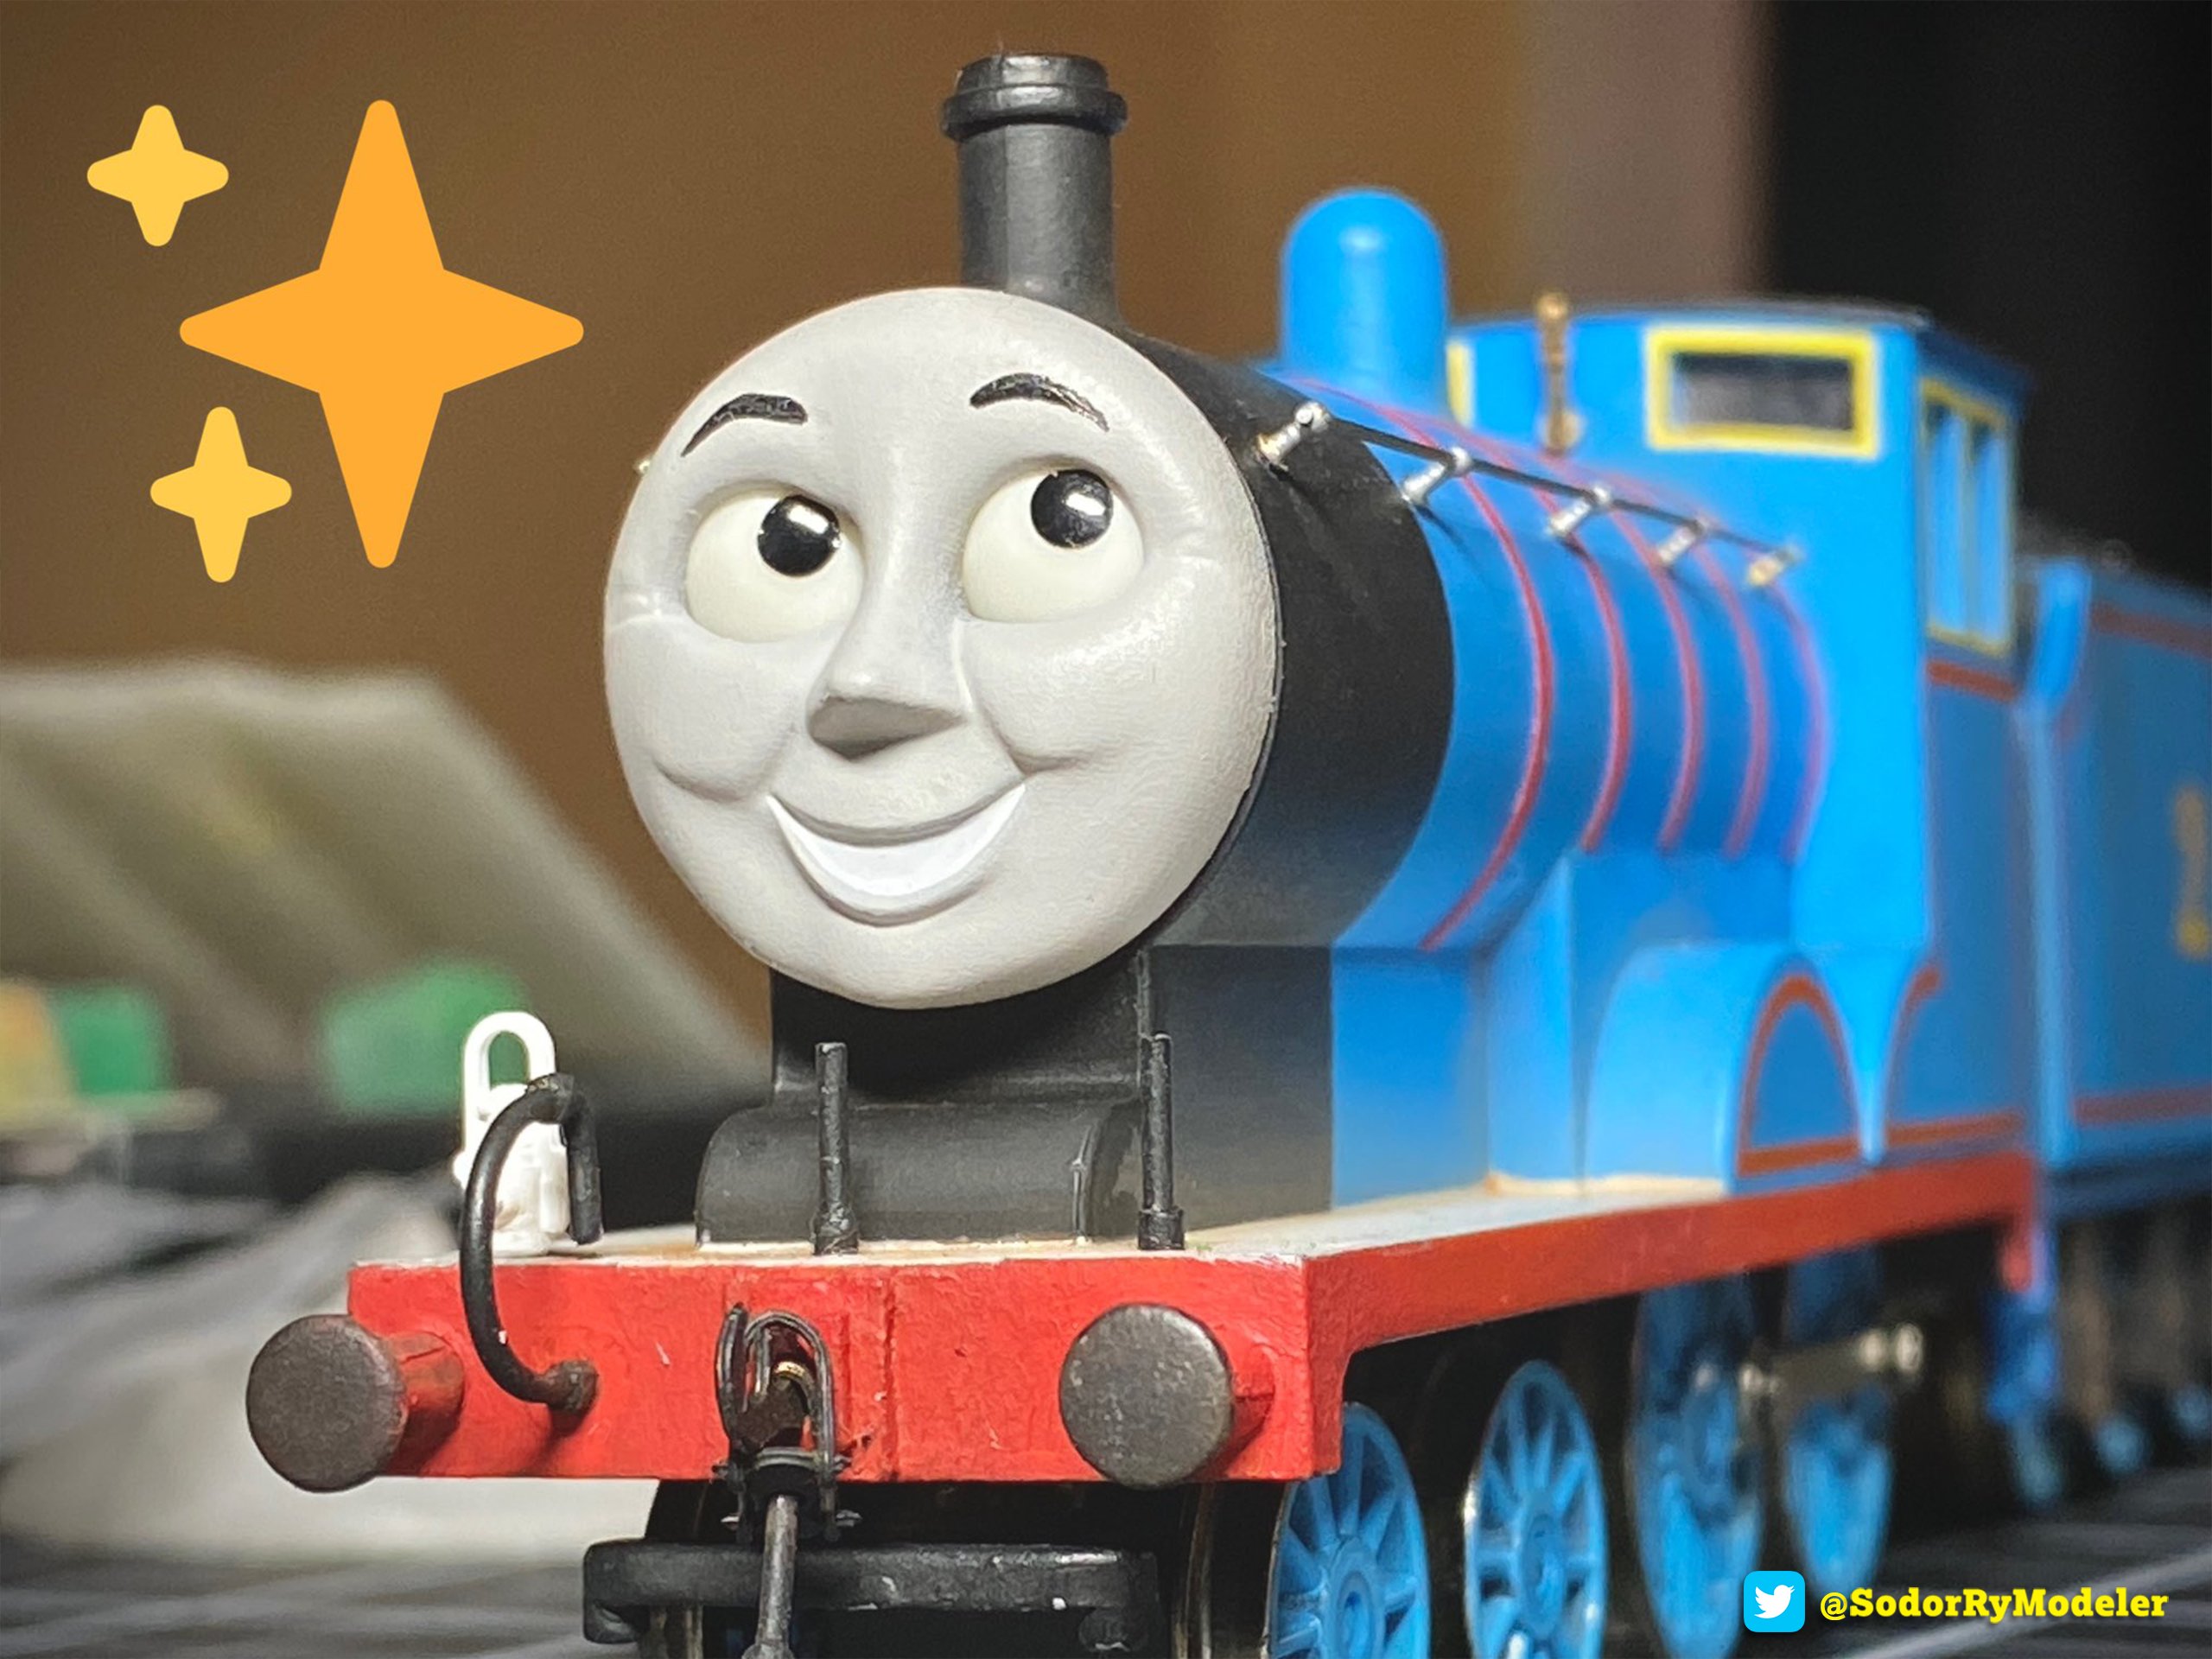 Stephen on X: @TidmouthThunder @bachmanntrains This is the best